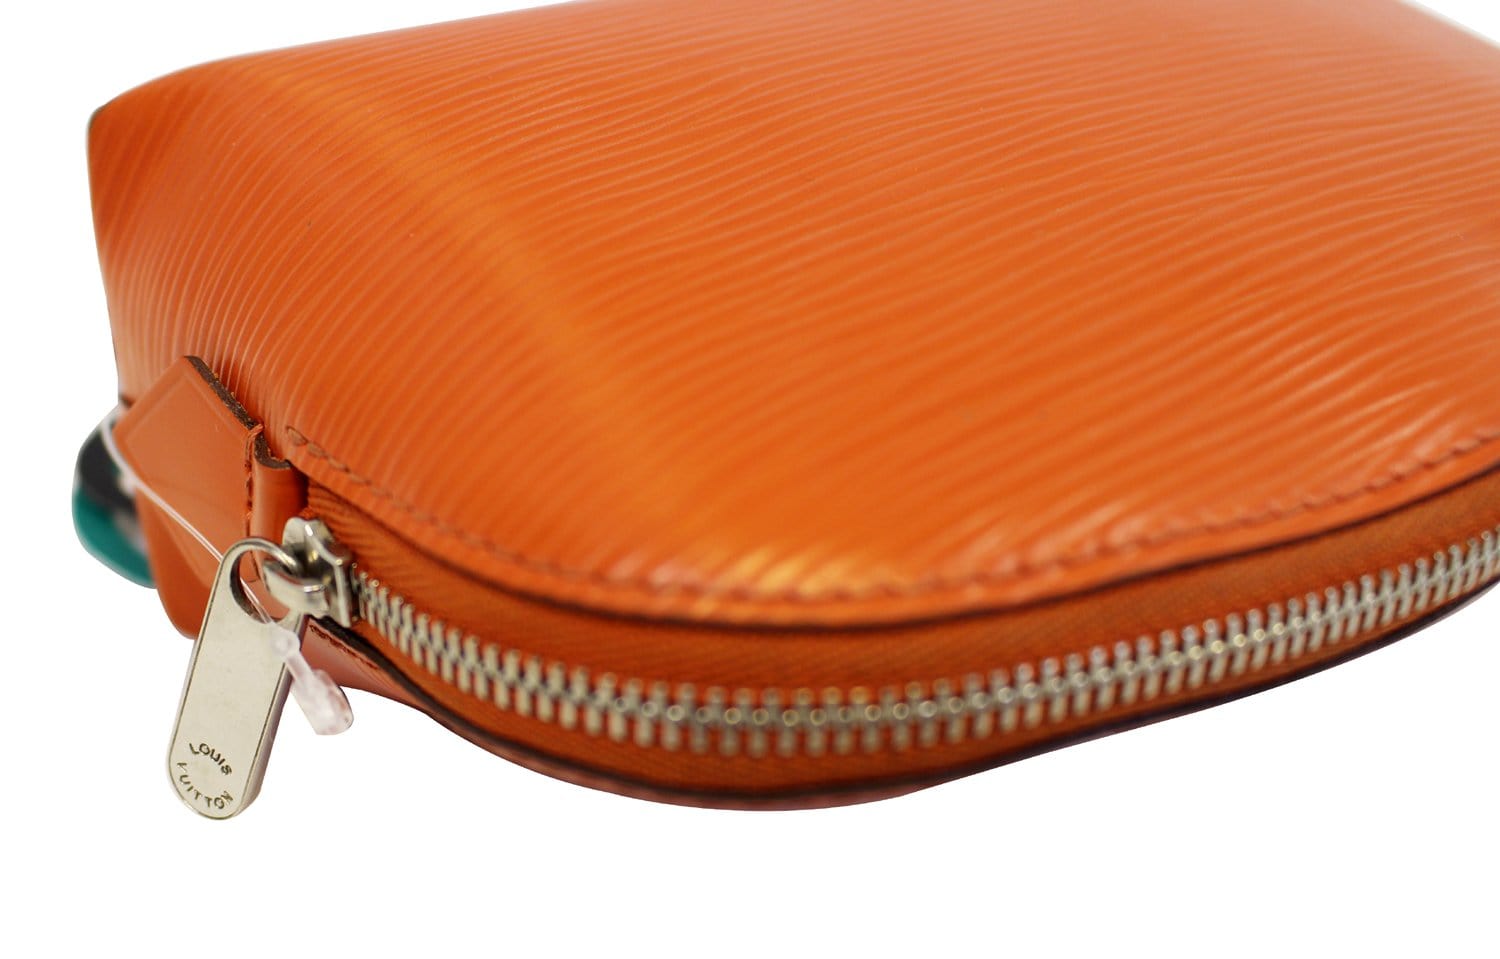 Louis Vuitton Cosmetic Pouch Orange Patent Leather Clutch Bag (Pre-Own